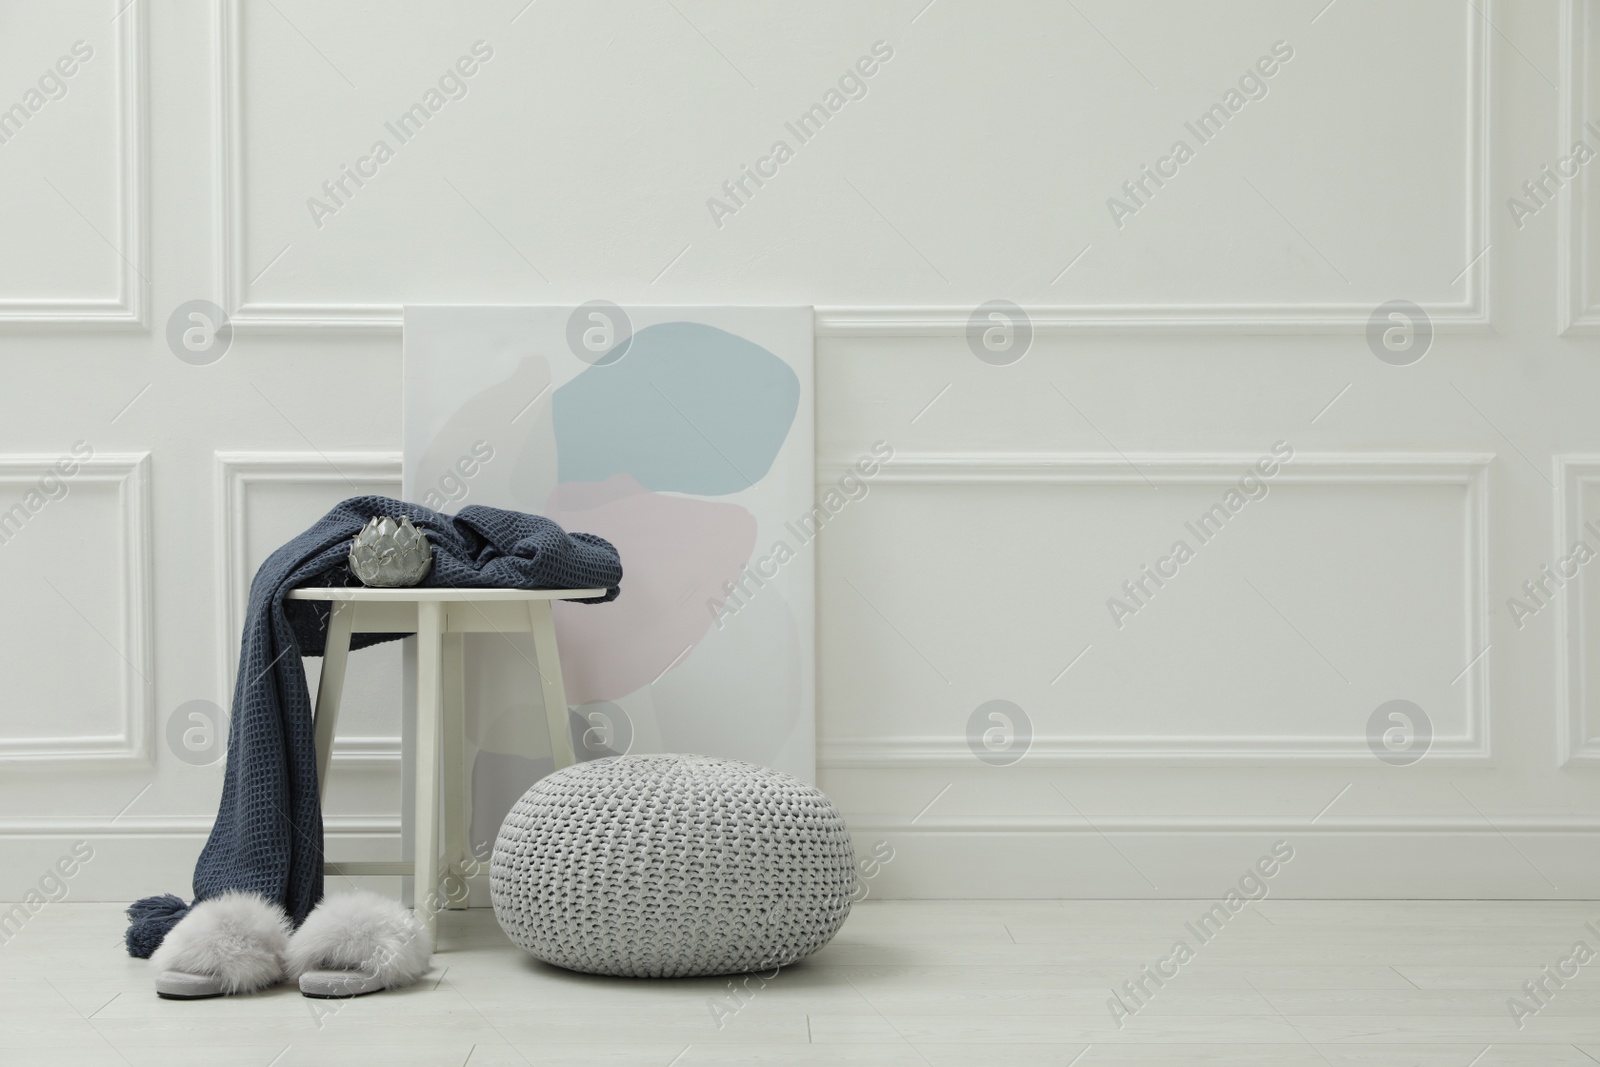 Photo of Knitted pouf, fuzzy slippers and decor elements near white wall indoors. Space for text